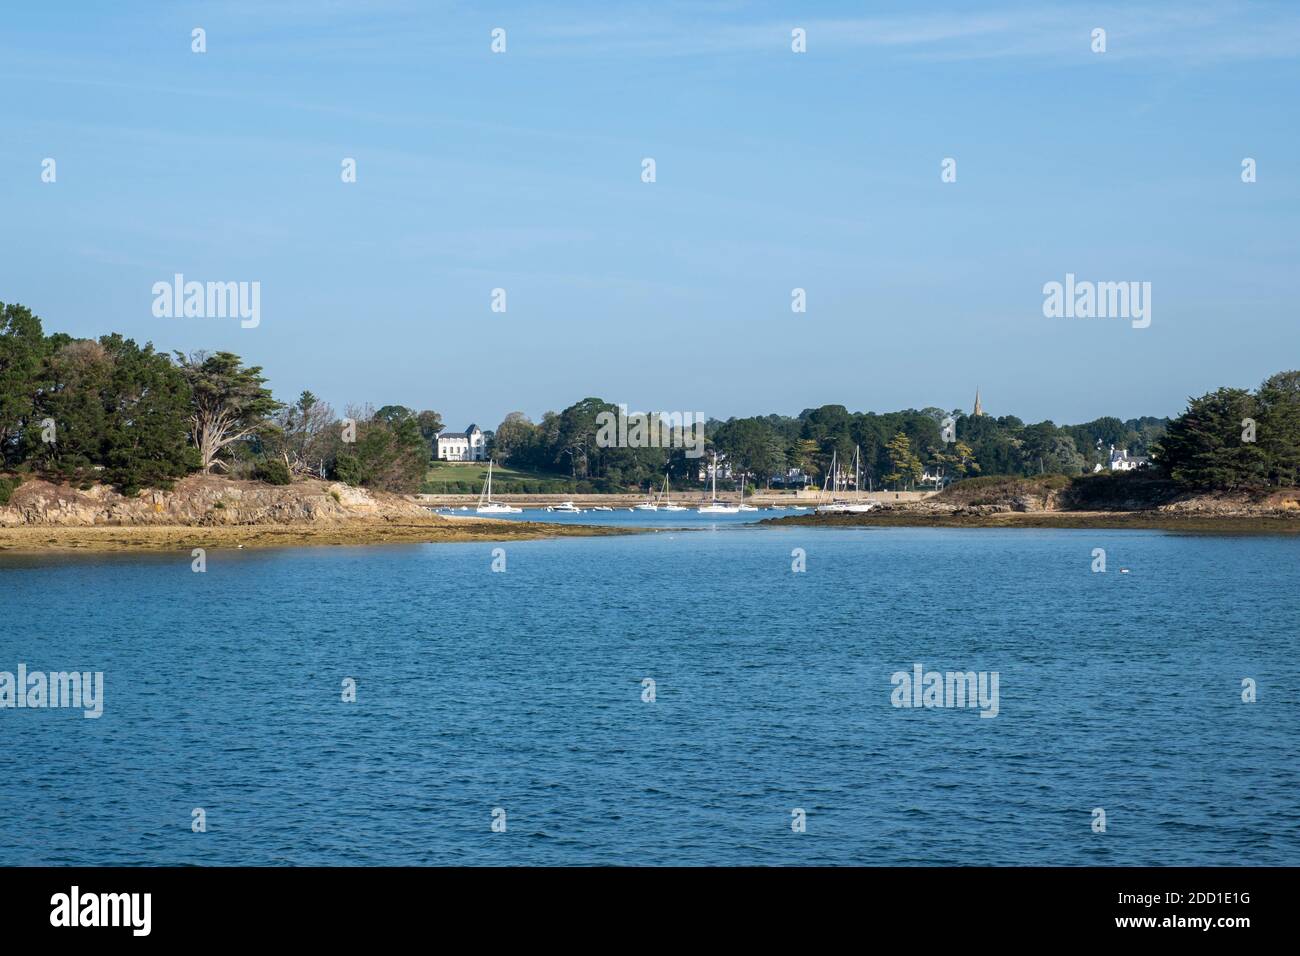 A chateau and boats moored at an island in The Golfe du Morbihan - Gulf of Morbihan - Brittany, France Stock Photo